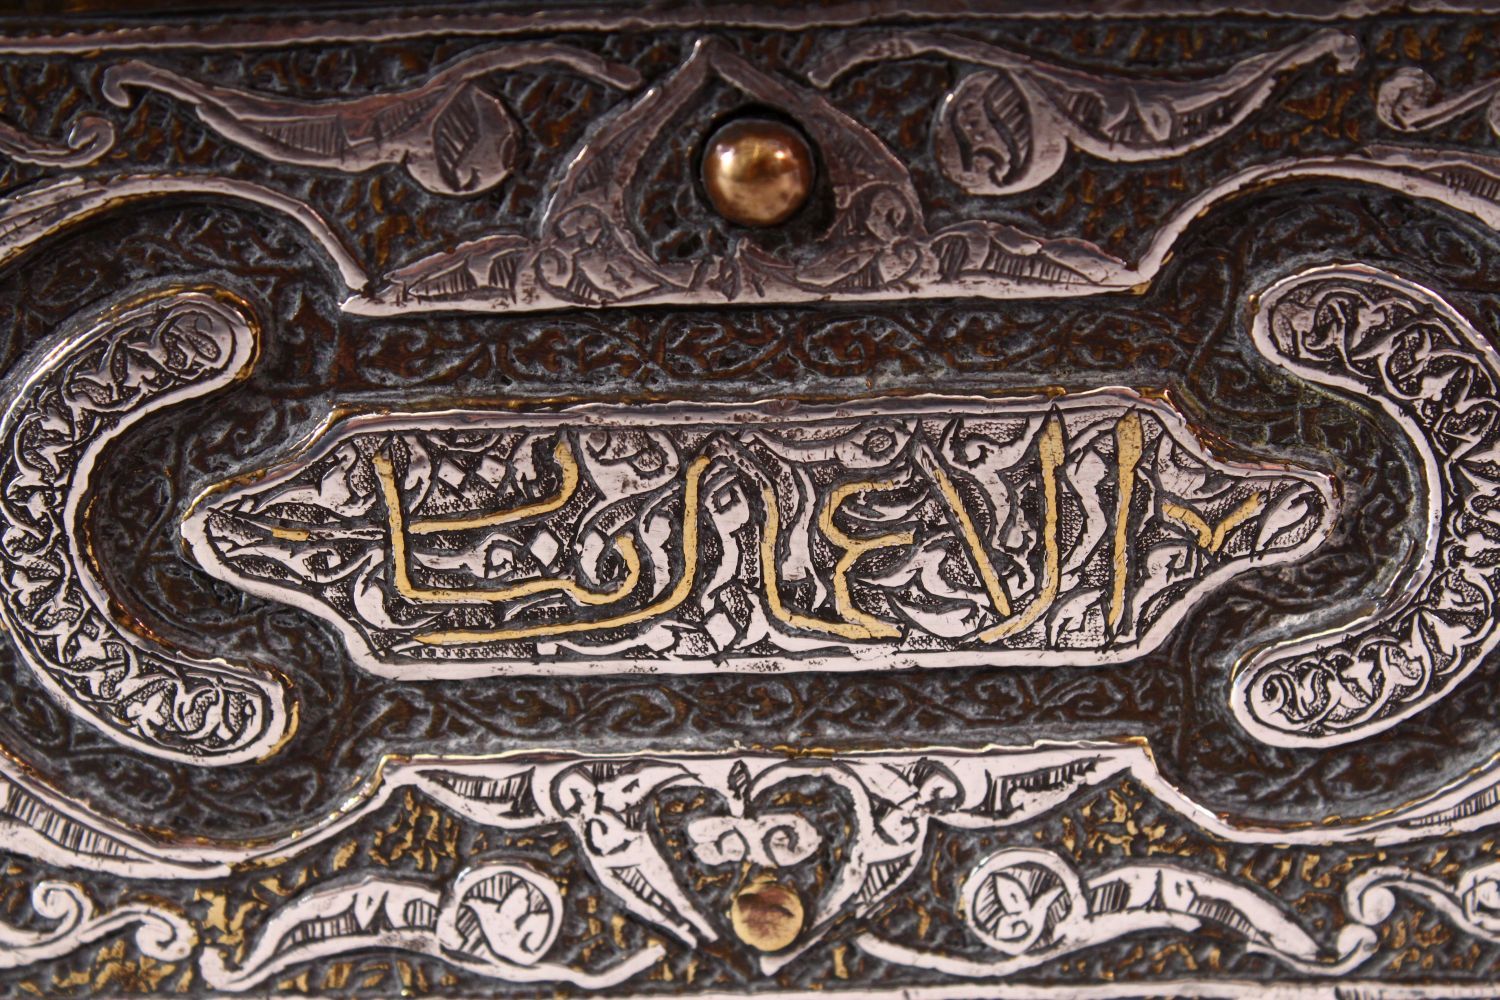 A GOOD 19TH CENTURY SYRIAN SILVER, COPPER AND BRASS RECTANGULAR CASKET, with panels of calligraphy - Image 3 of 10